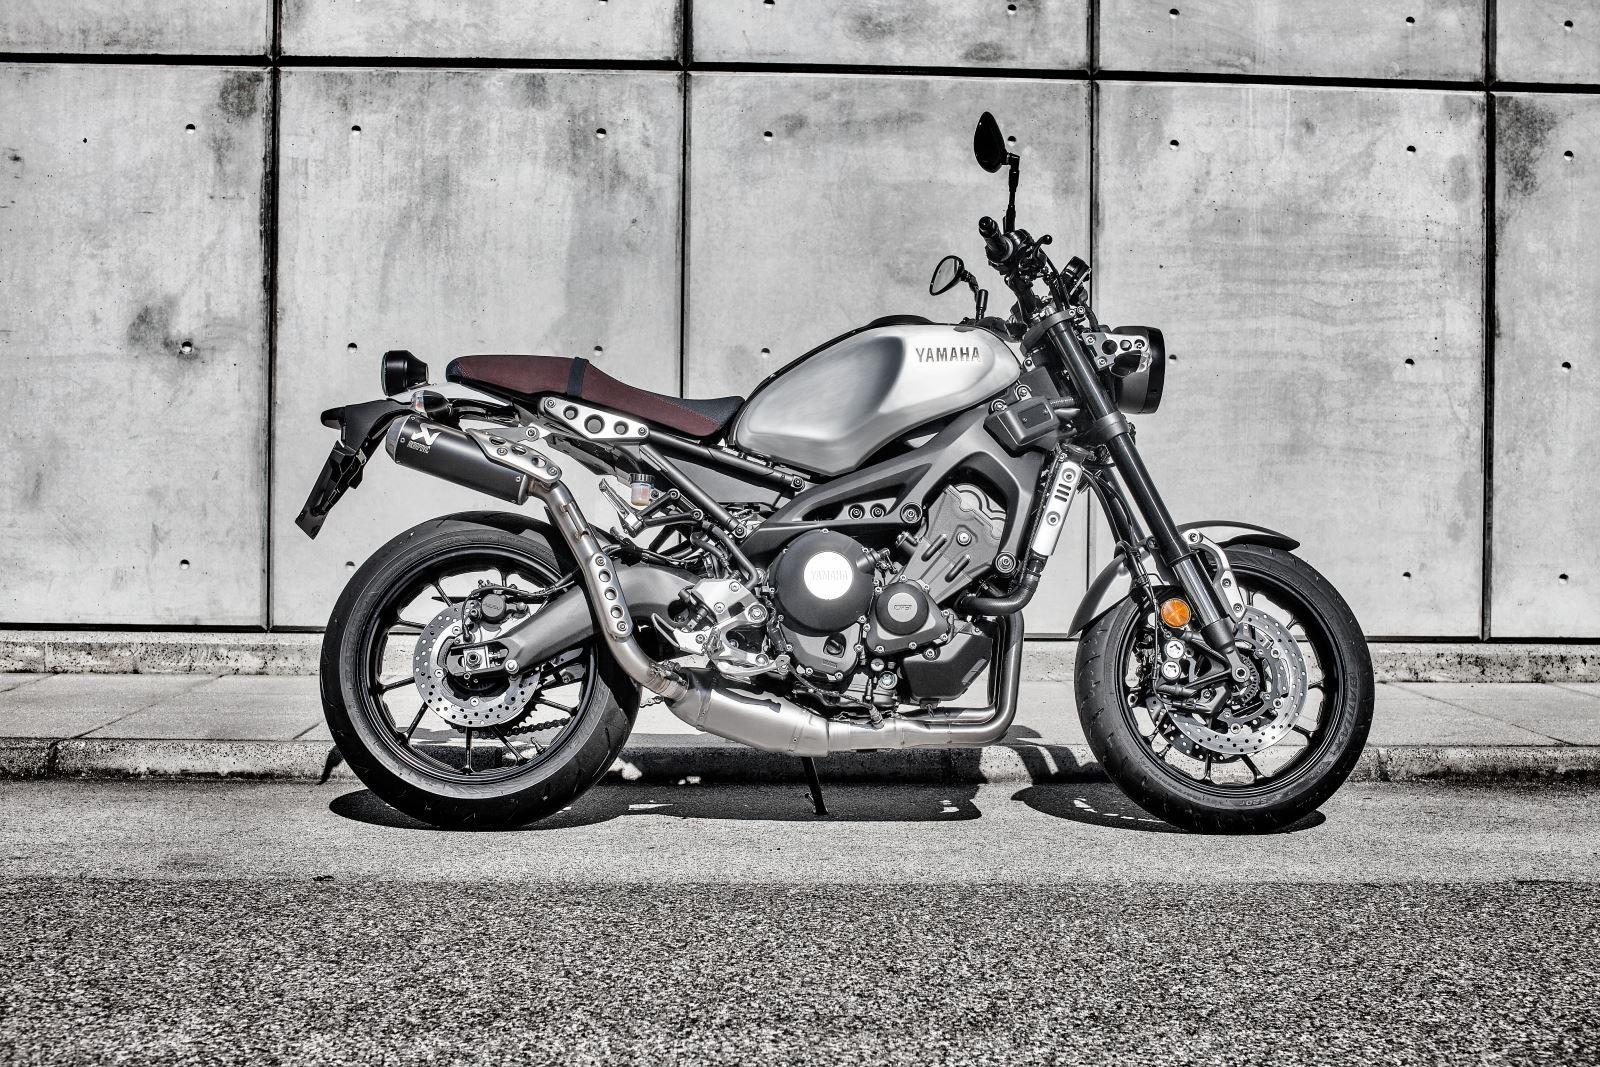 Yamaha XSR900 Souped Up with New Akrapovic Exhausts